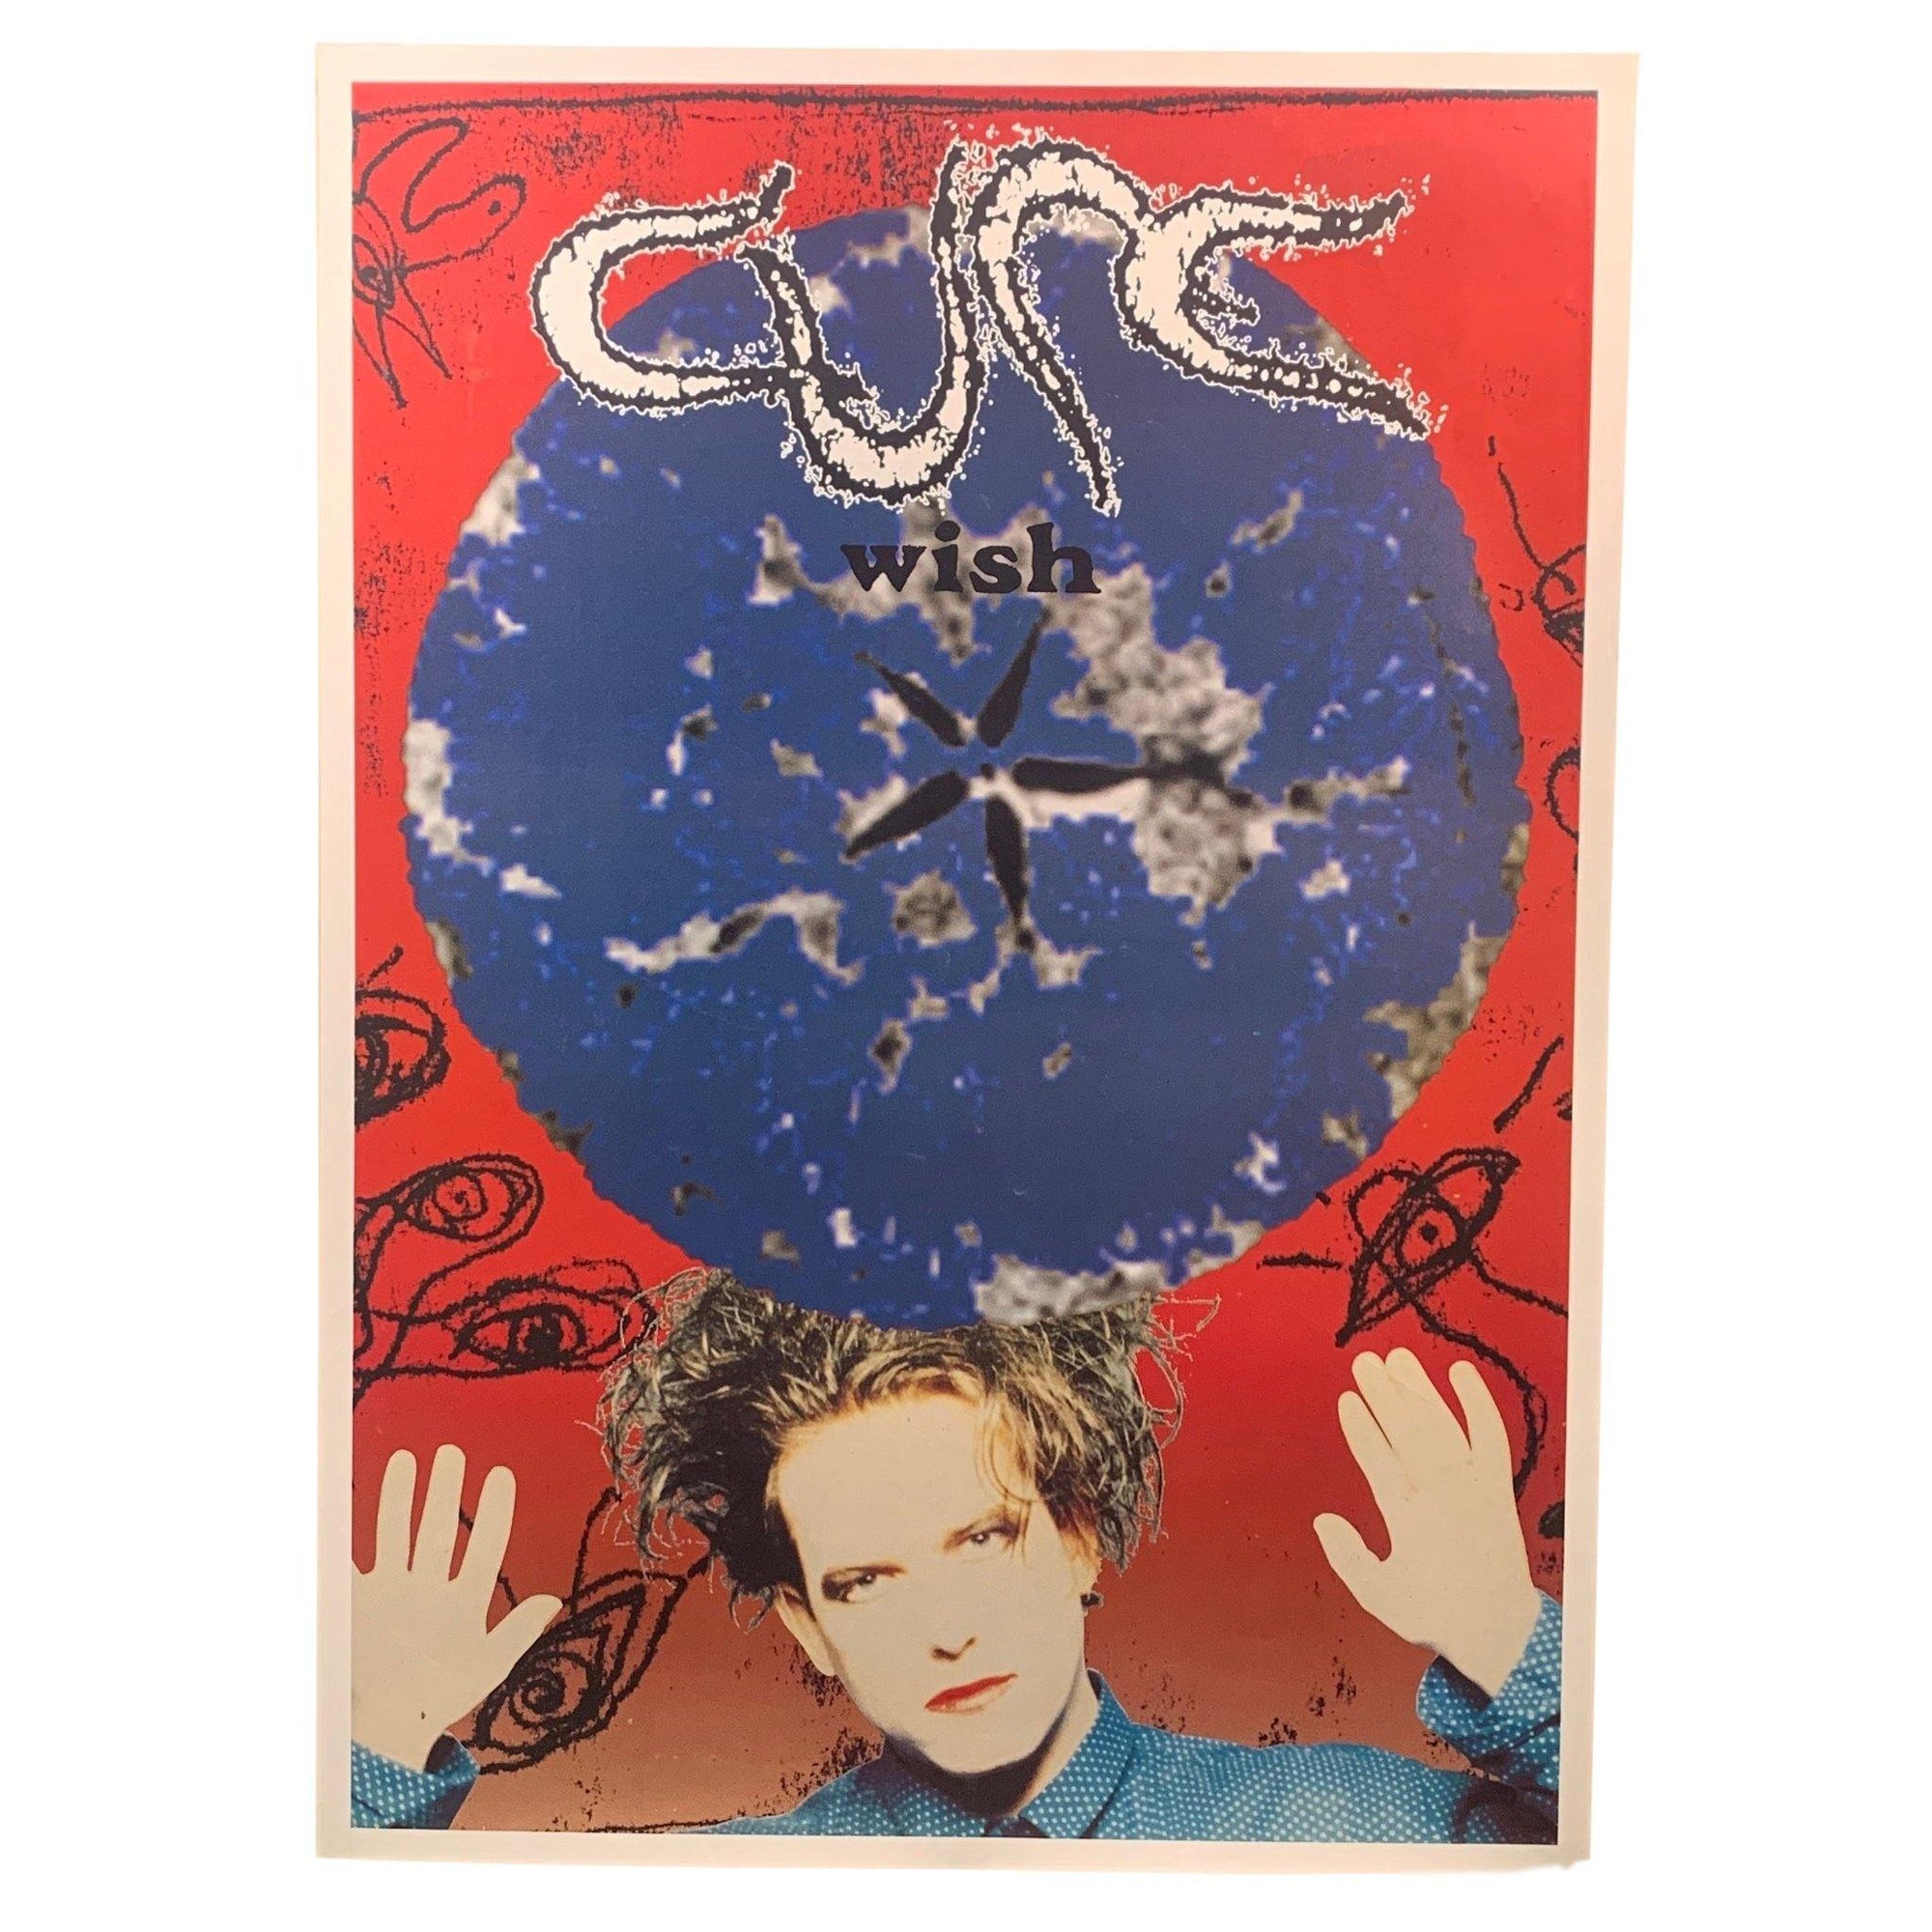 Vintage The Cure "Wish" Poster - jointcustodydc